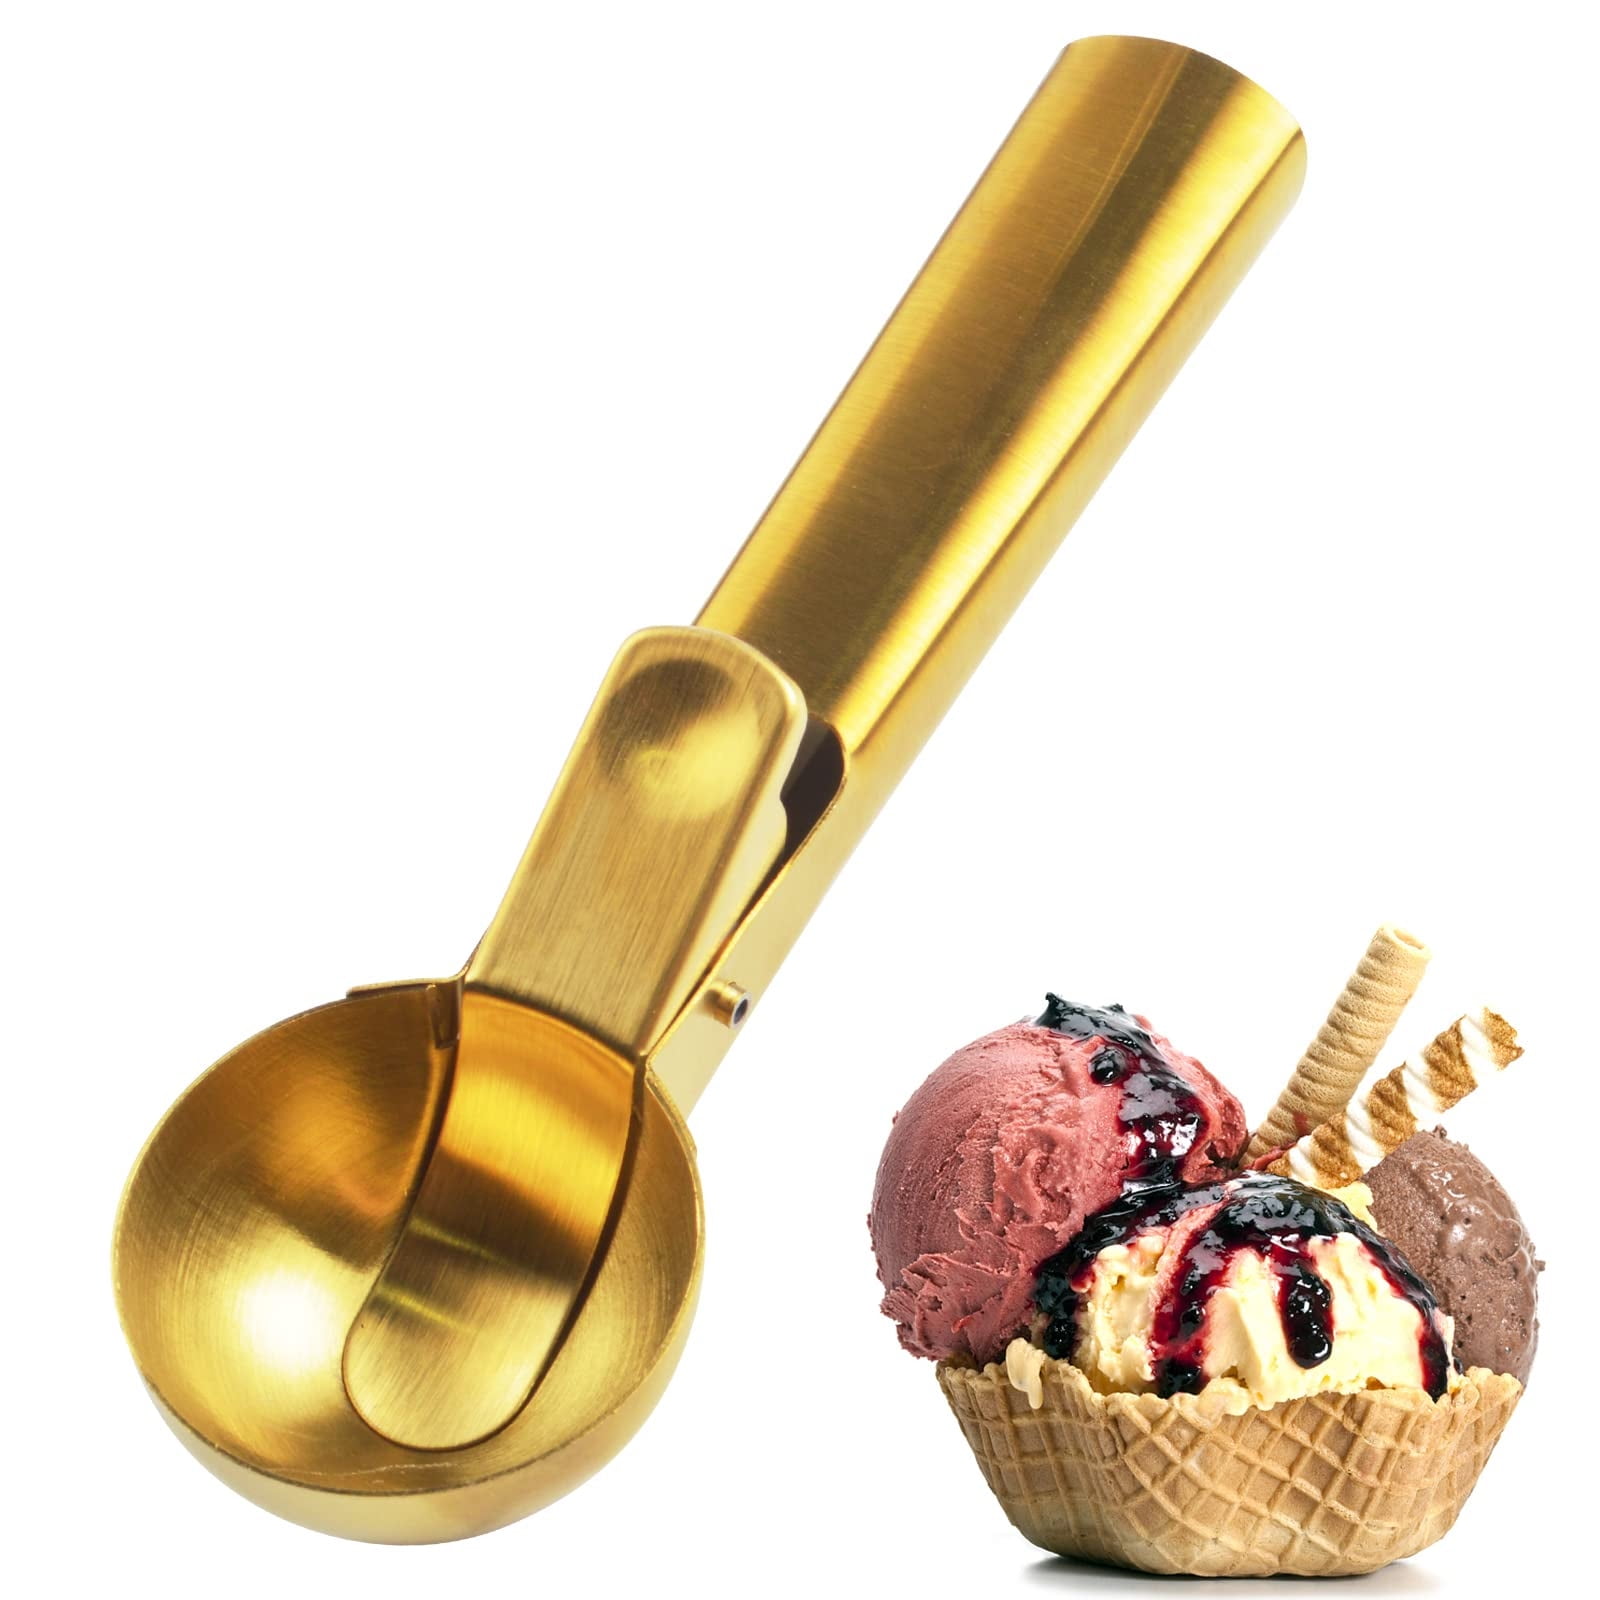 1 Piece Stainless Steel Ice Cream Scoop with Trigger and Handle Design  Portable Ice-Cream Spoon with Spring Design for Ice Cream, Fruit Jsmhh  (Color : Golden)